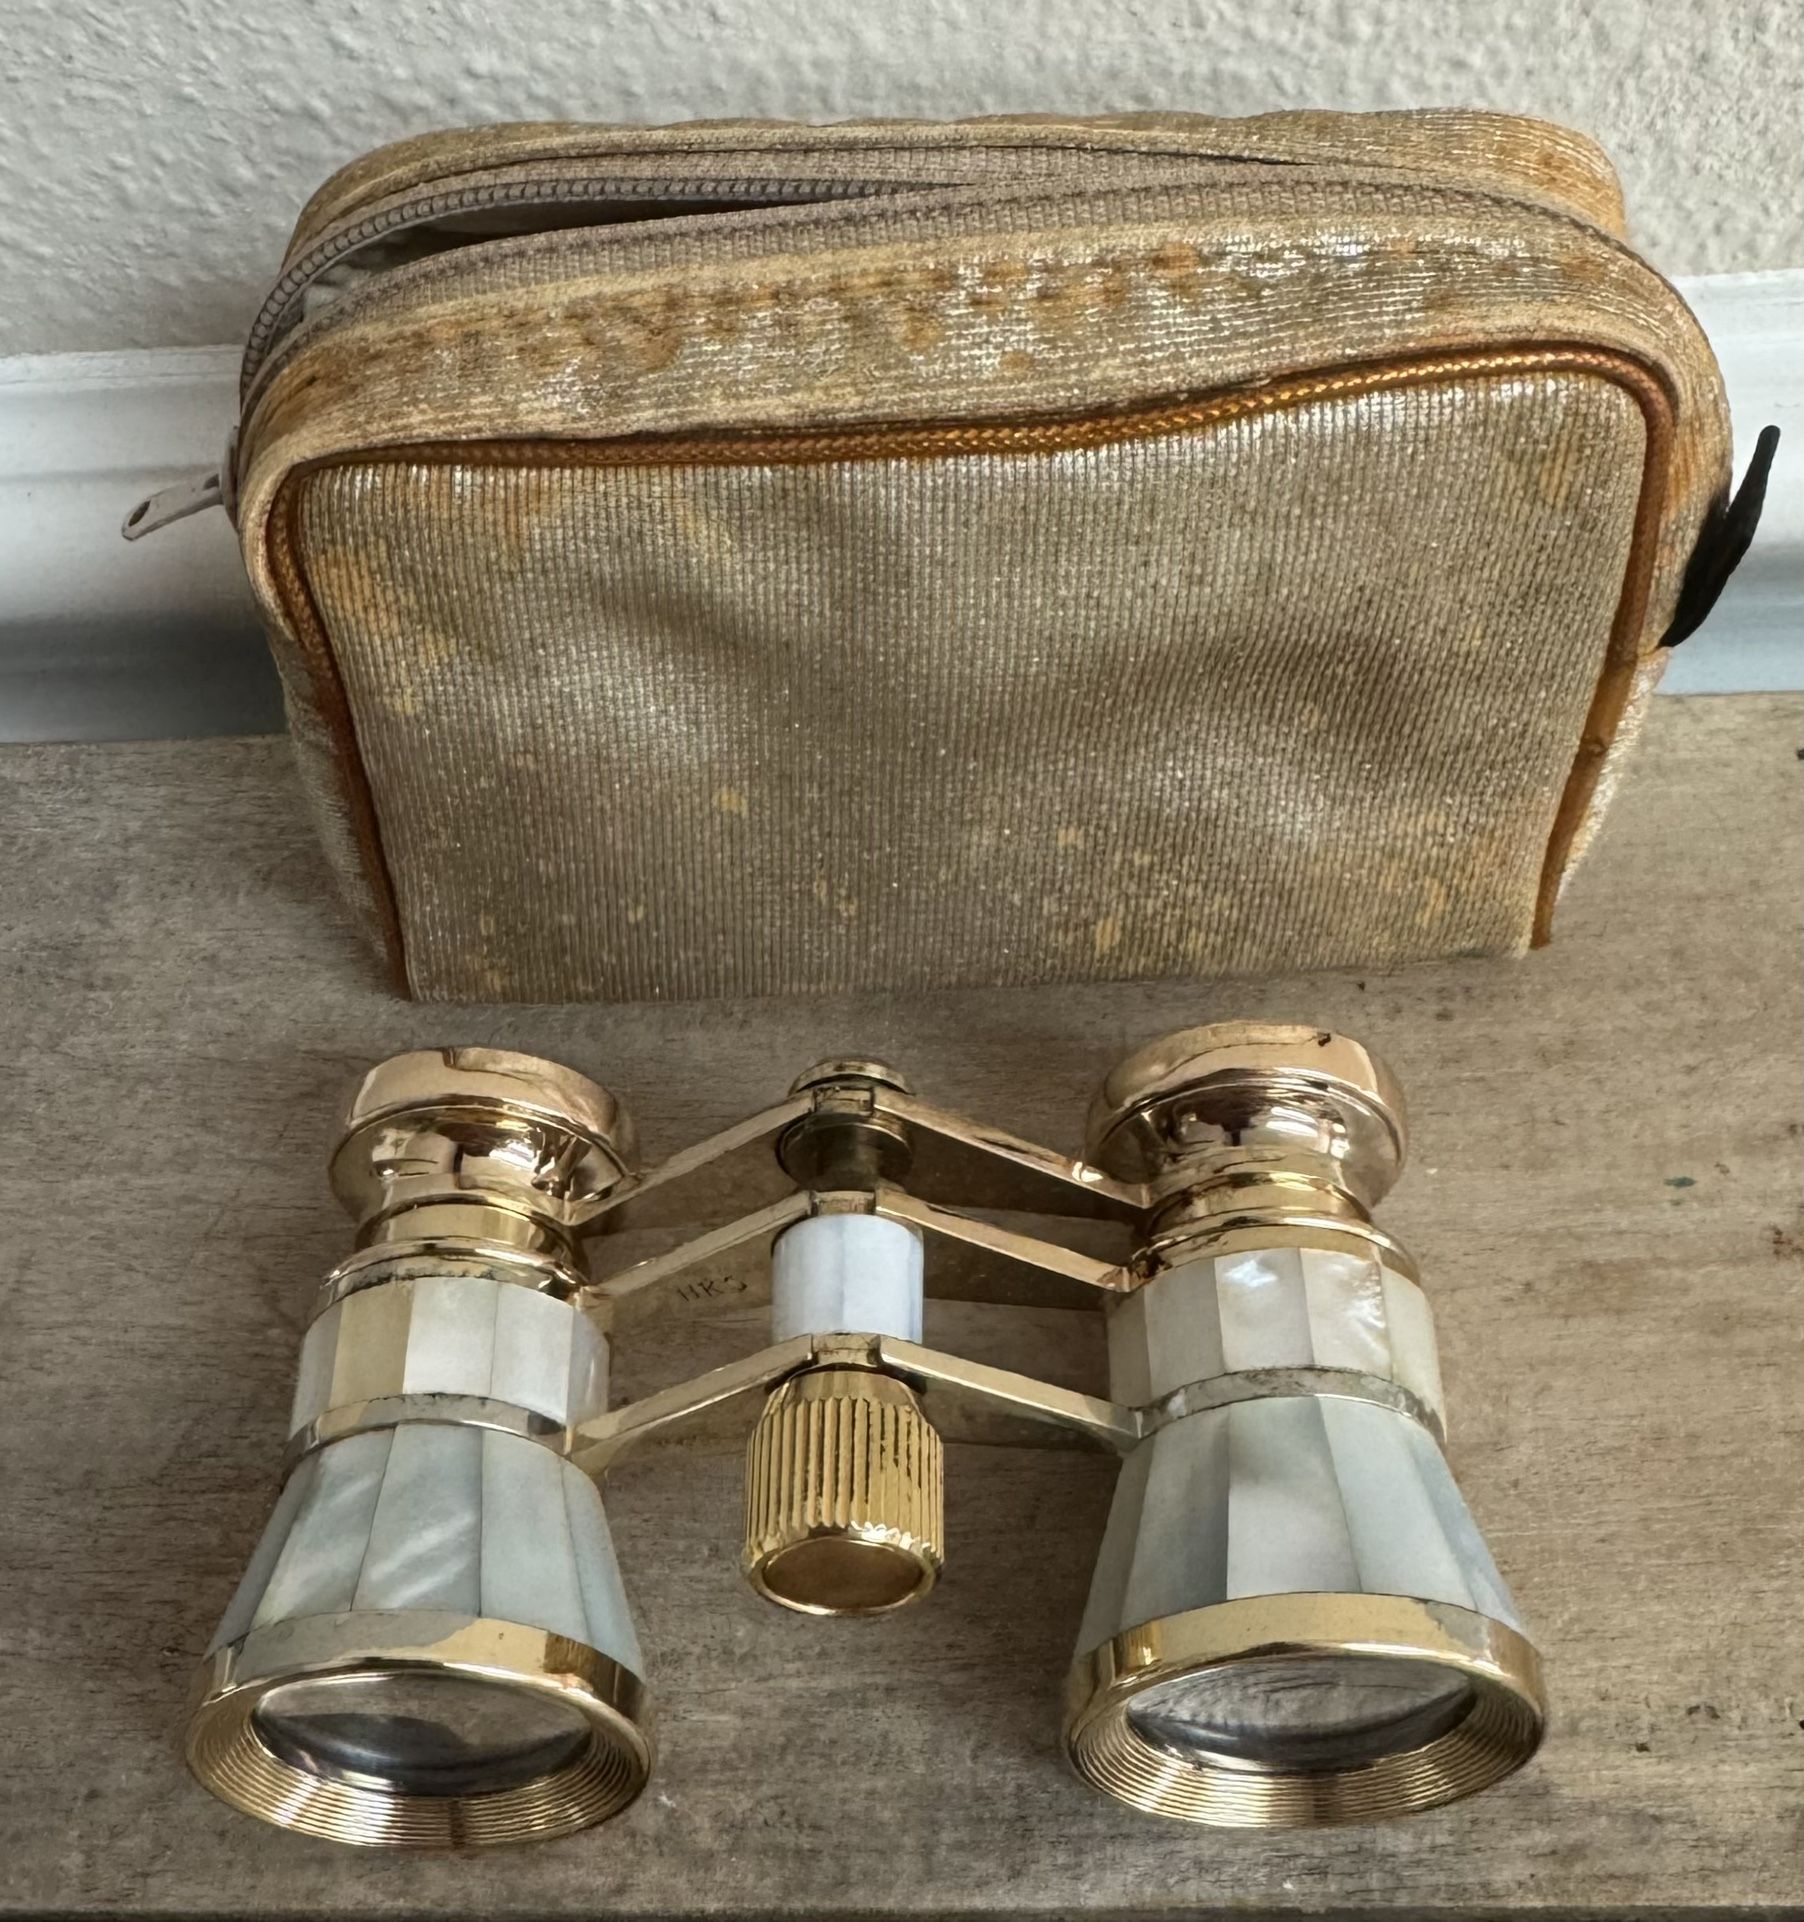 Vintage Tasco Opera Glasses Binoculars Mother of Pearl with Carry Bag just $25 xox